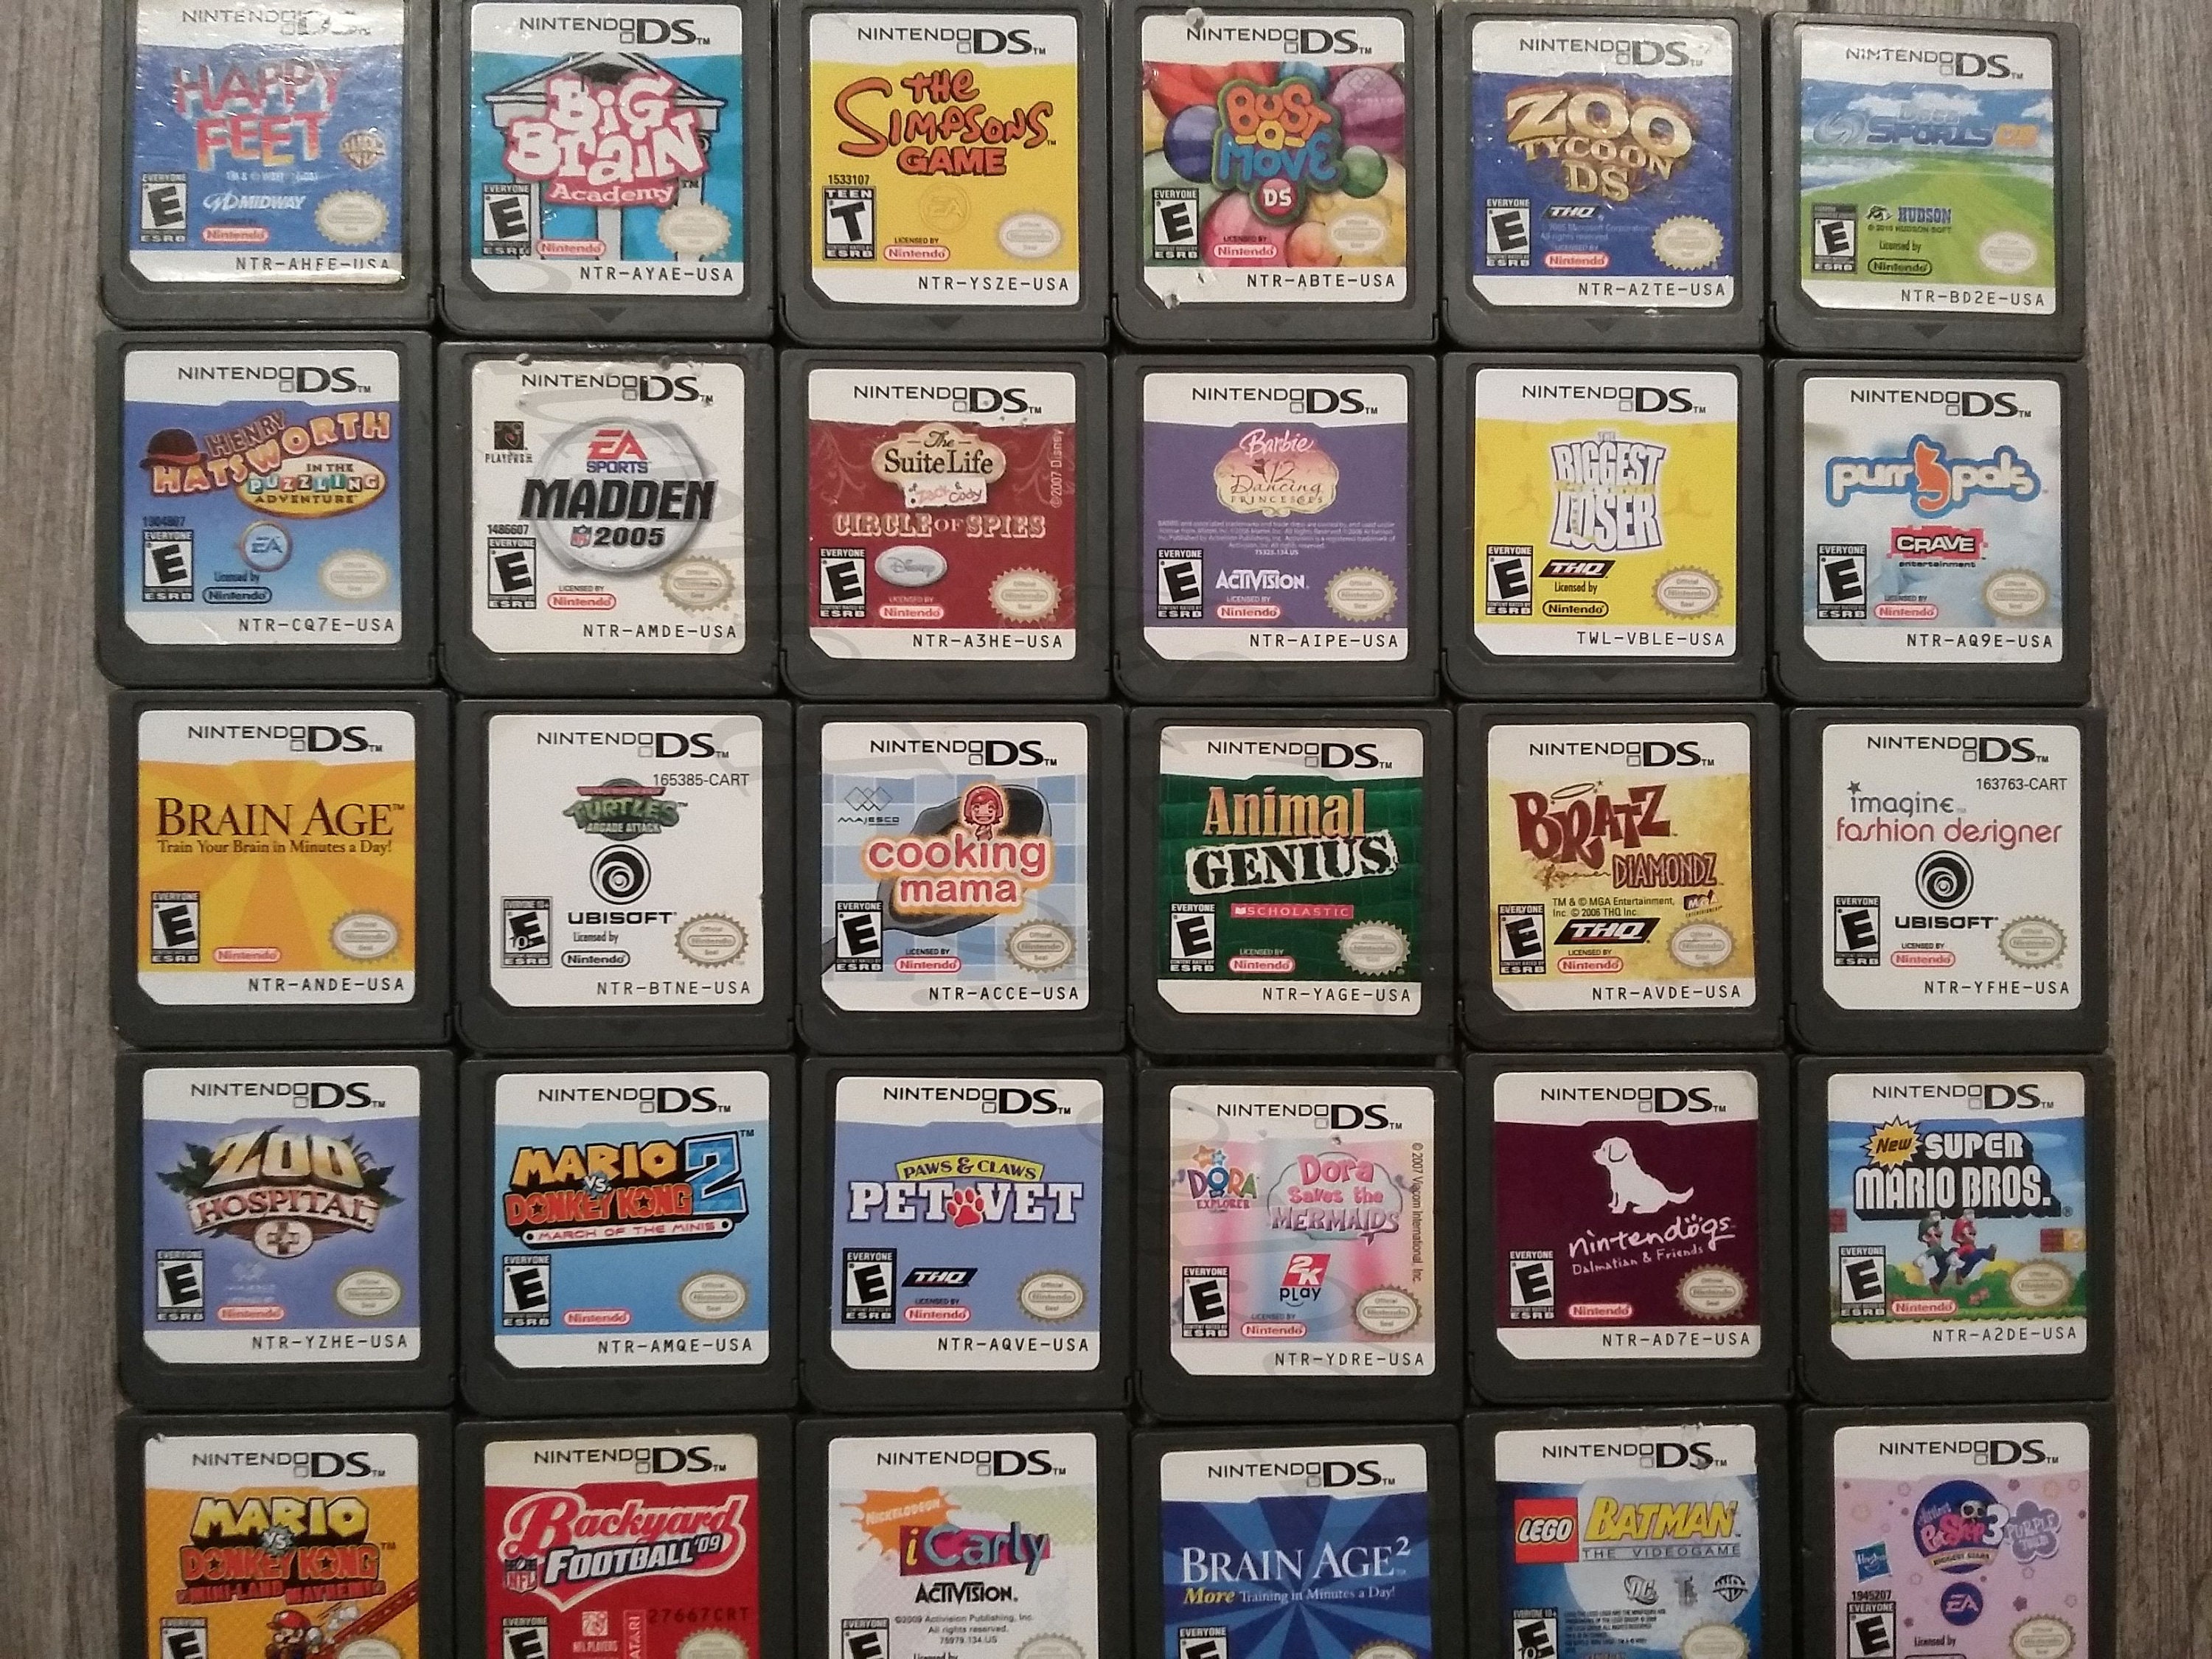 Nintendo DS Games for DS / Dslite / Dsi / 3DS XL and 2DS | Etsy UK